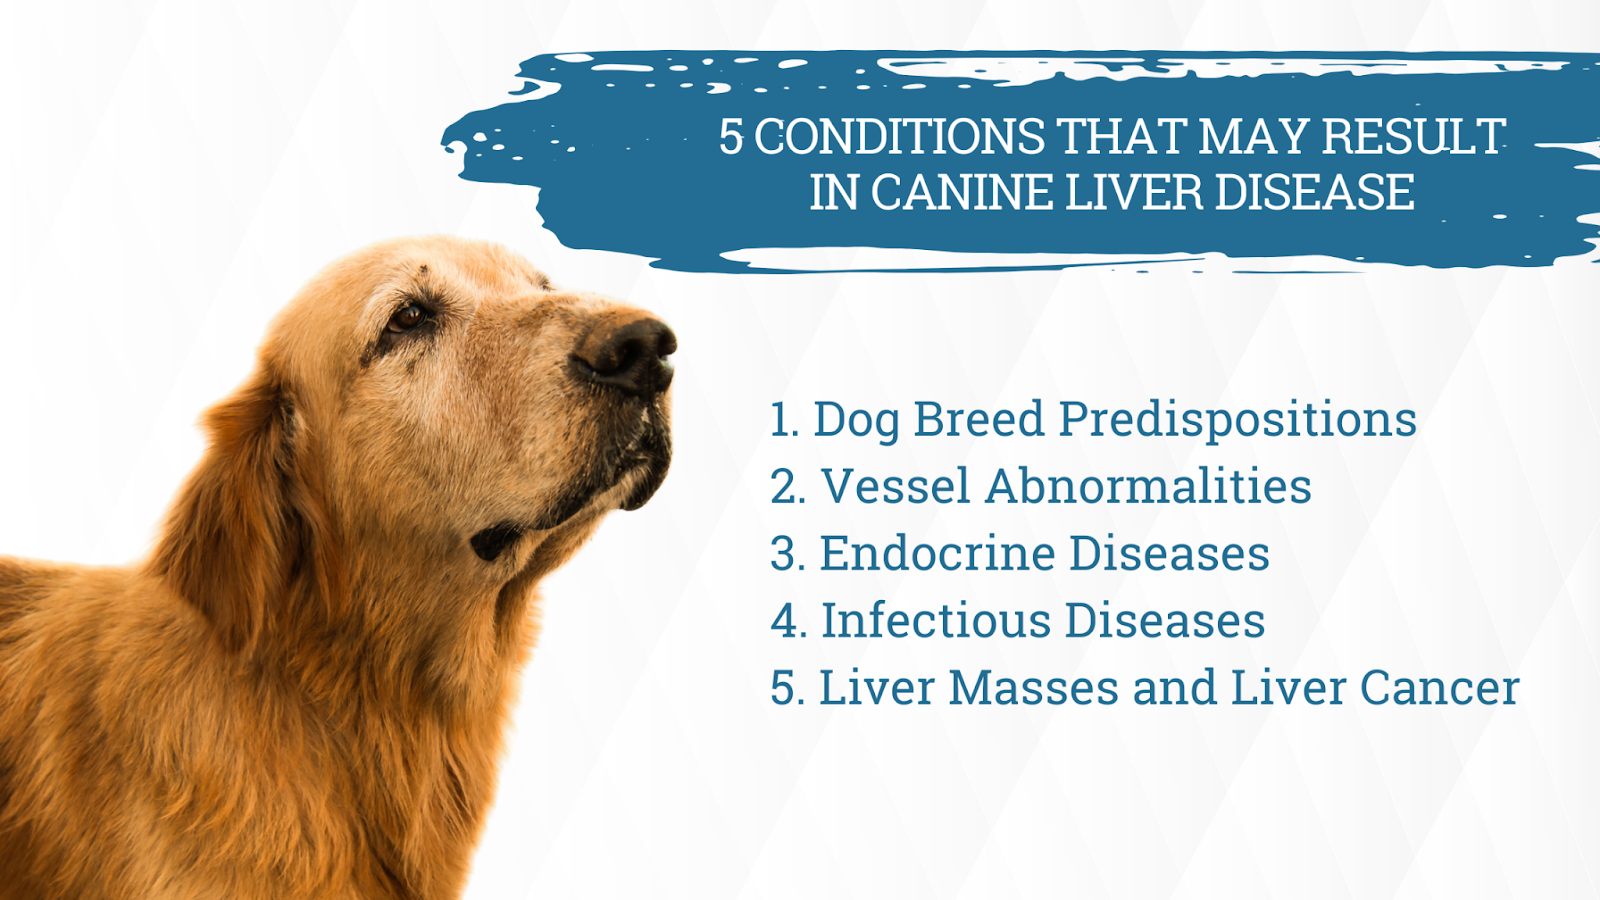 5 conditions resulting in canine liver disease